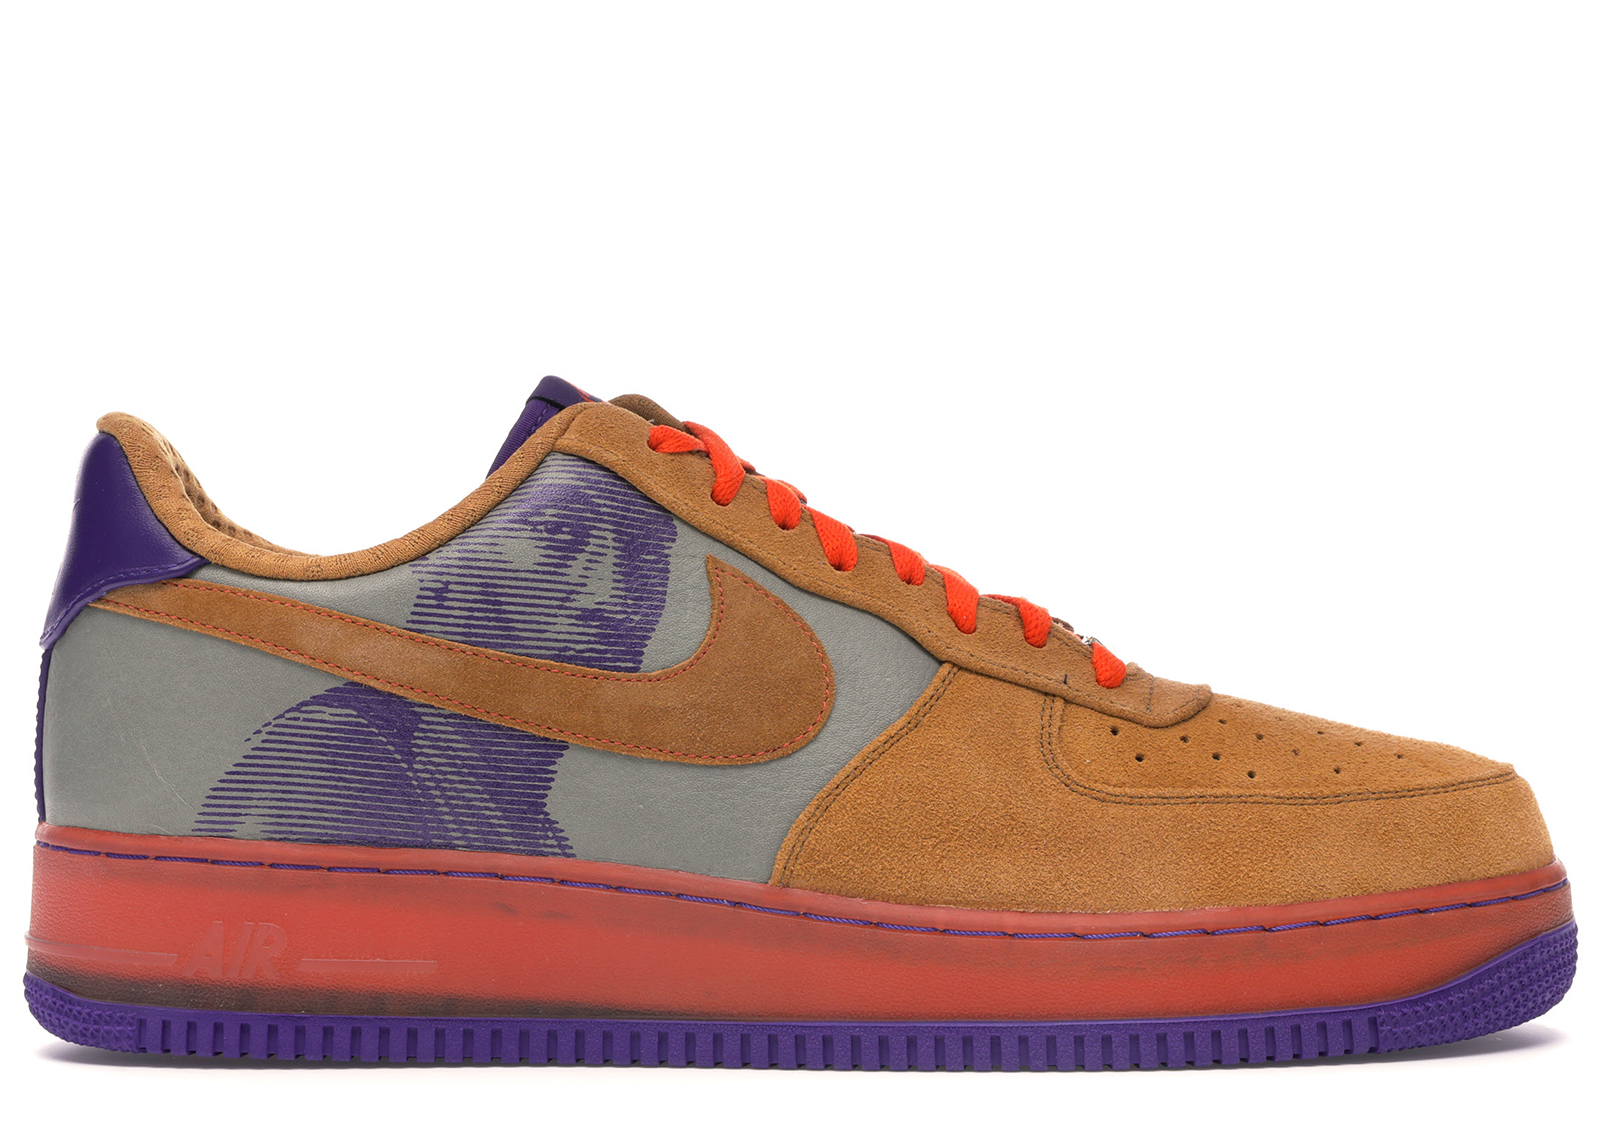 nike air force 1 amare stoudemire